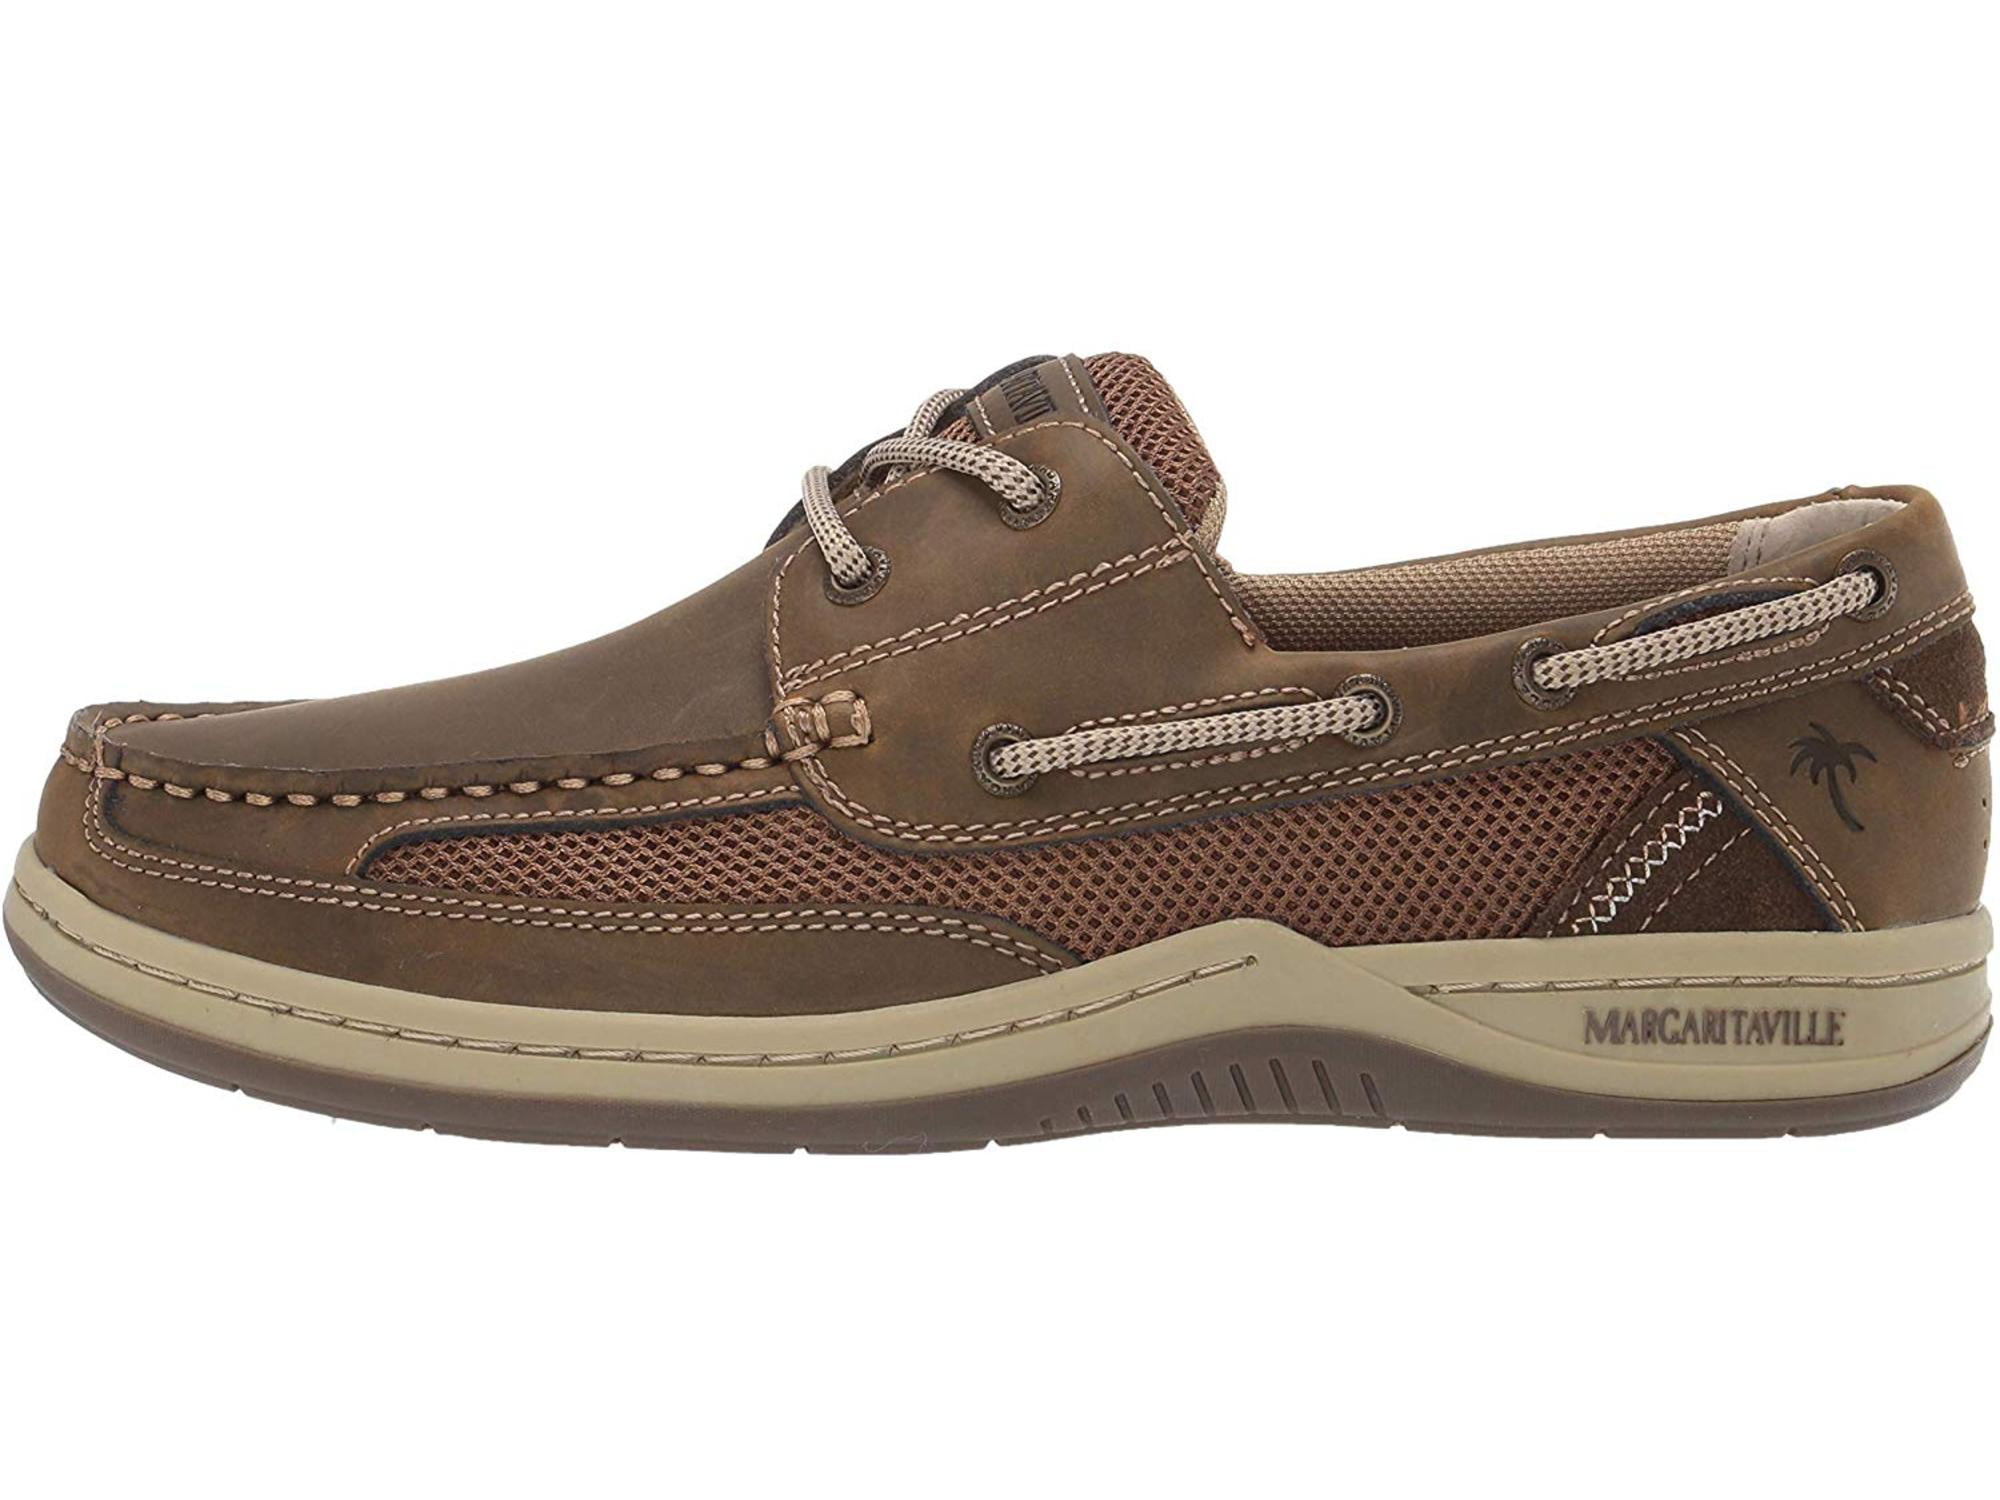 Anchor Lace Boat Shoe, Brown 